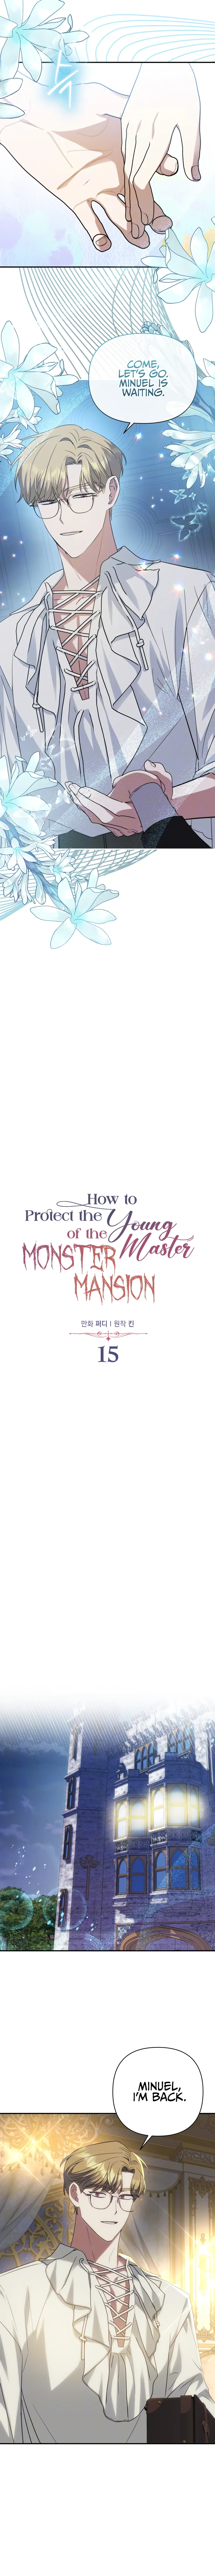 How To Protect The Young Master Of The Monster Mansion - chapter 15 - #4